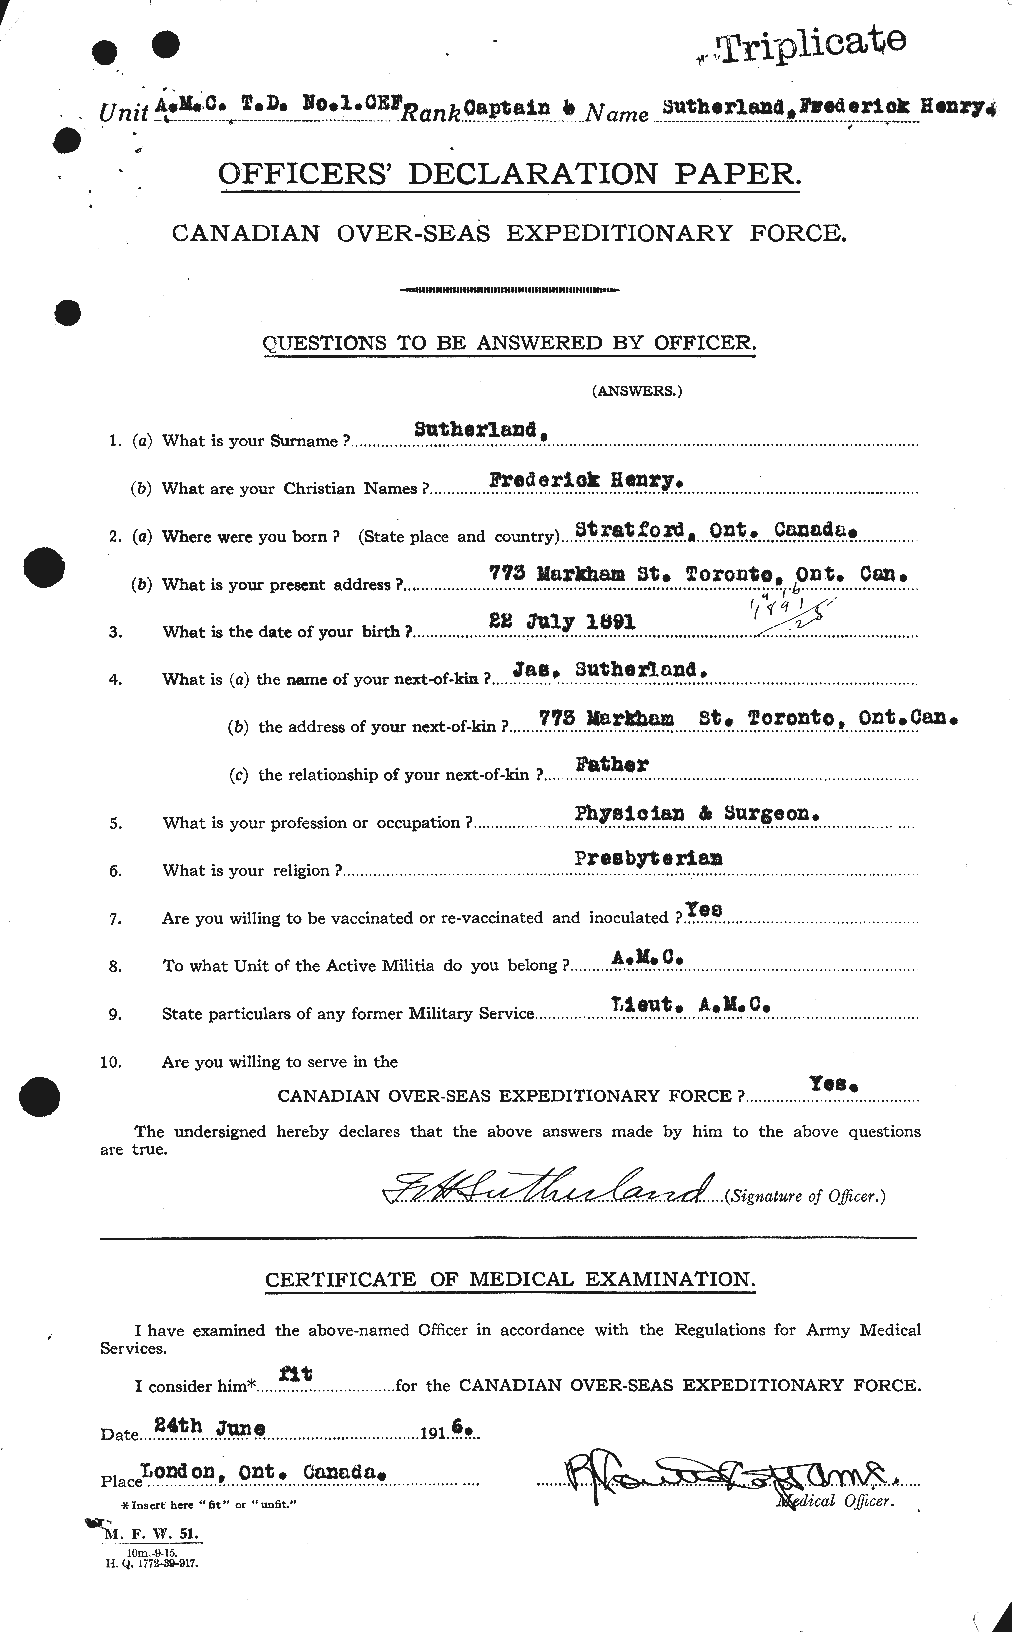 Personnel Records of the First World War - CEF 624659a